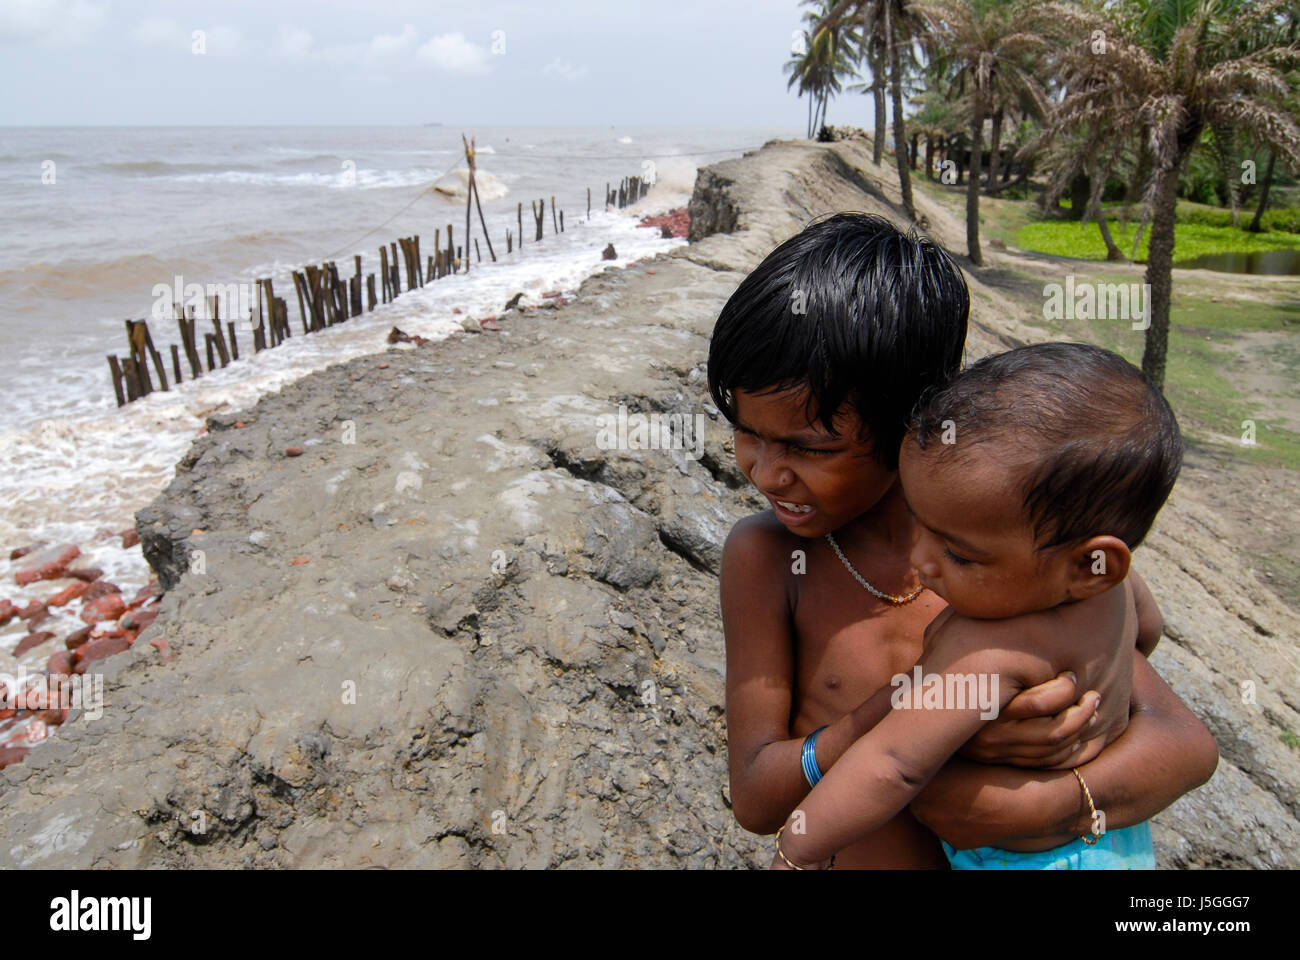 INDIA, West Bengal, Ganges river delta Sundarbans , Sagar Island , broken dyke due to sea erosion and rising sea levels, girl carry infant Stock Photo